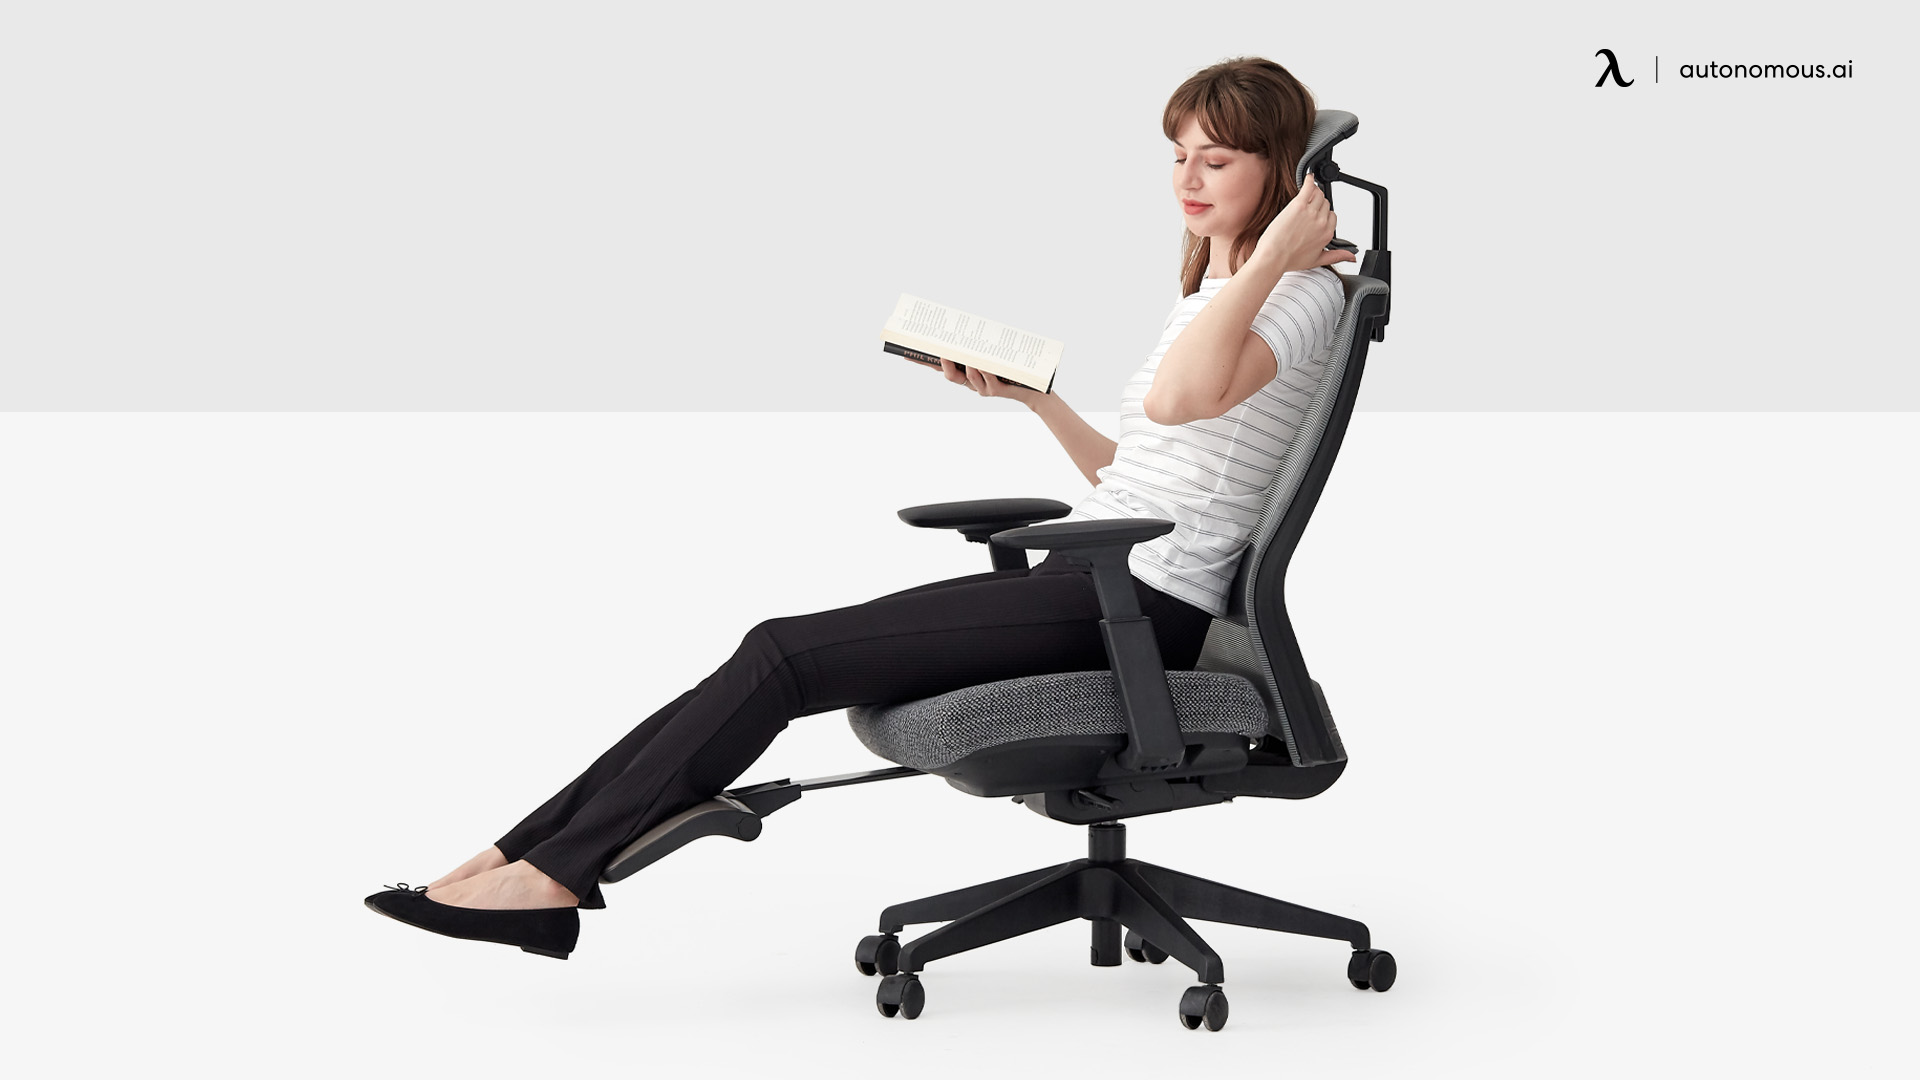 swivel chair with footstool is Good for Posture